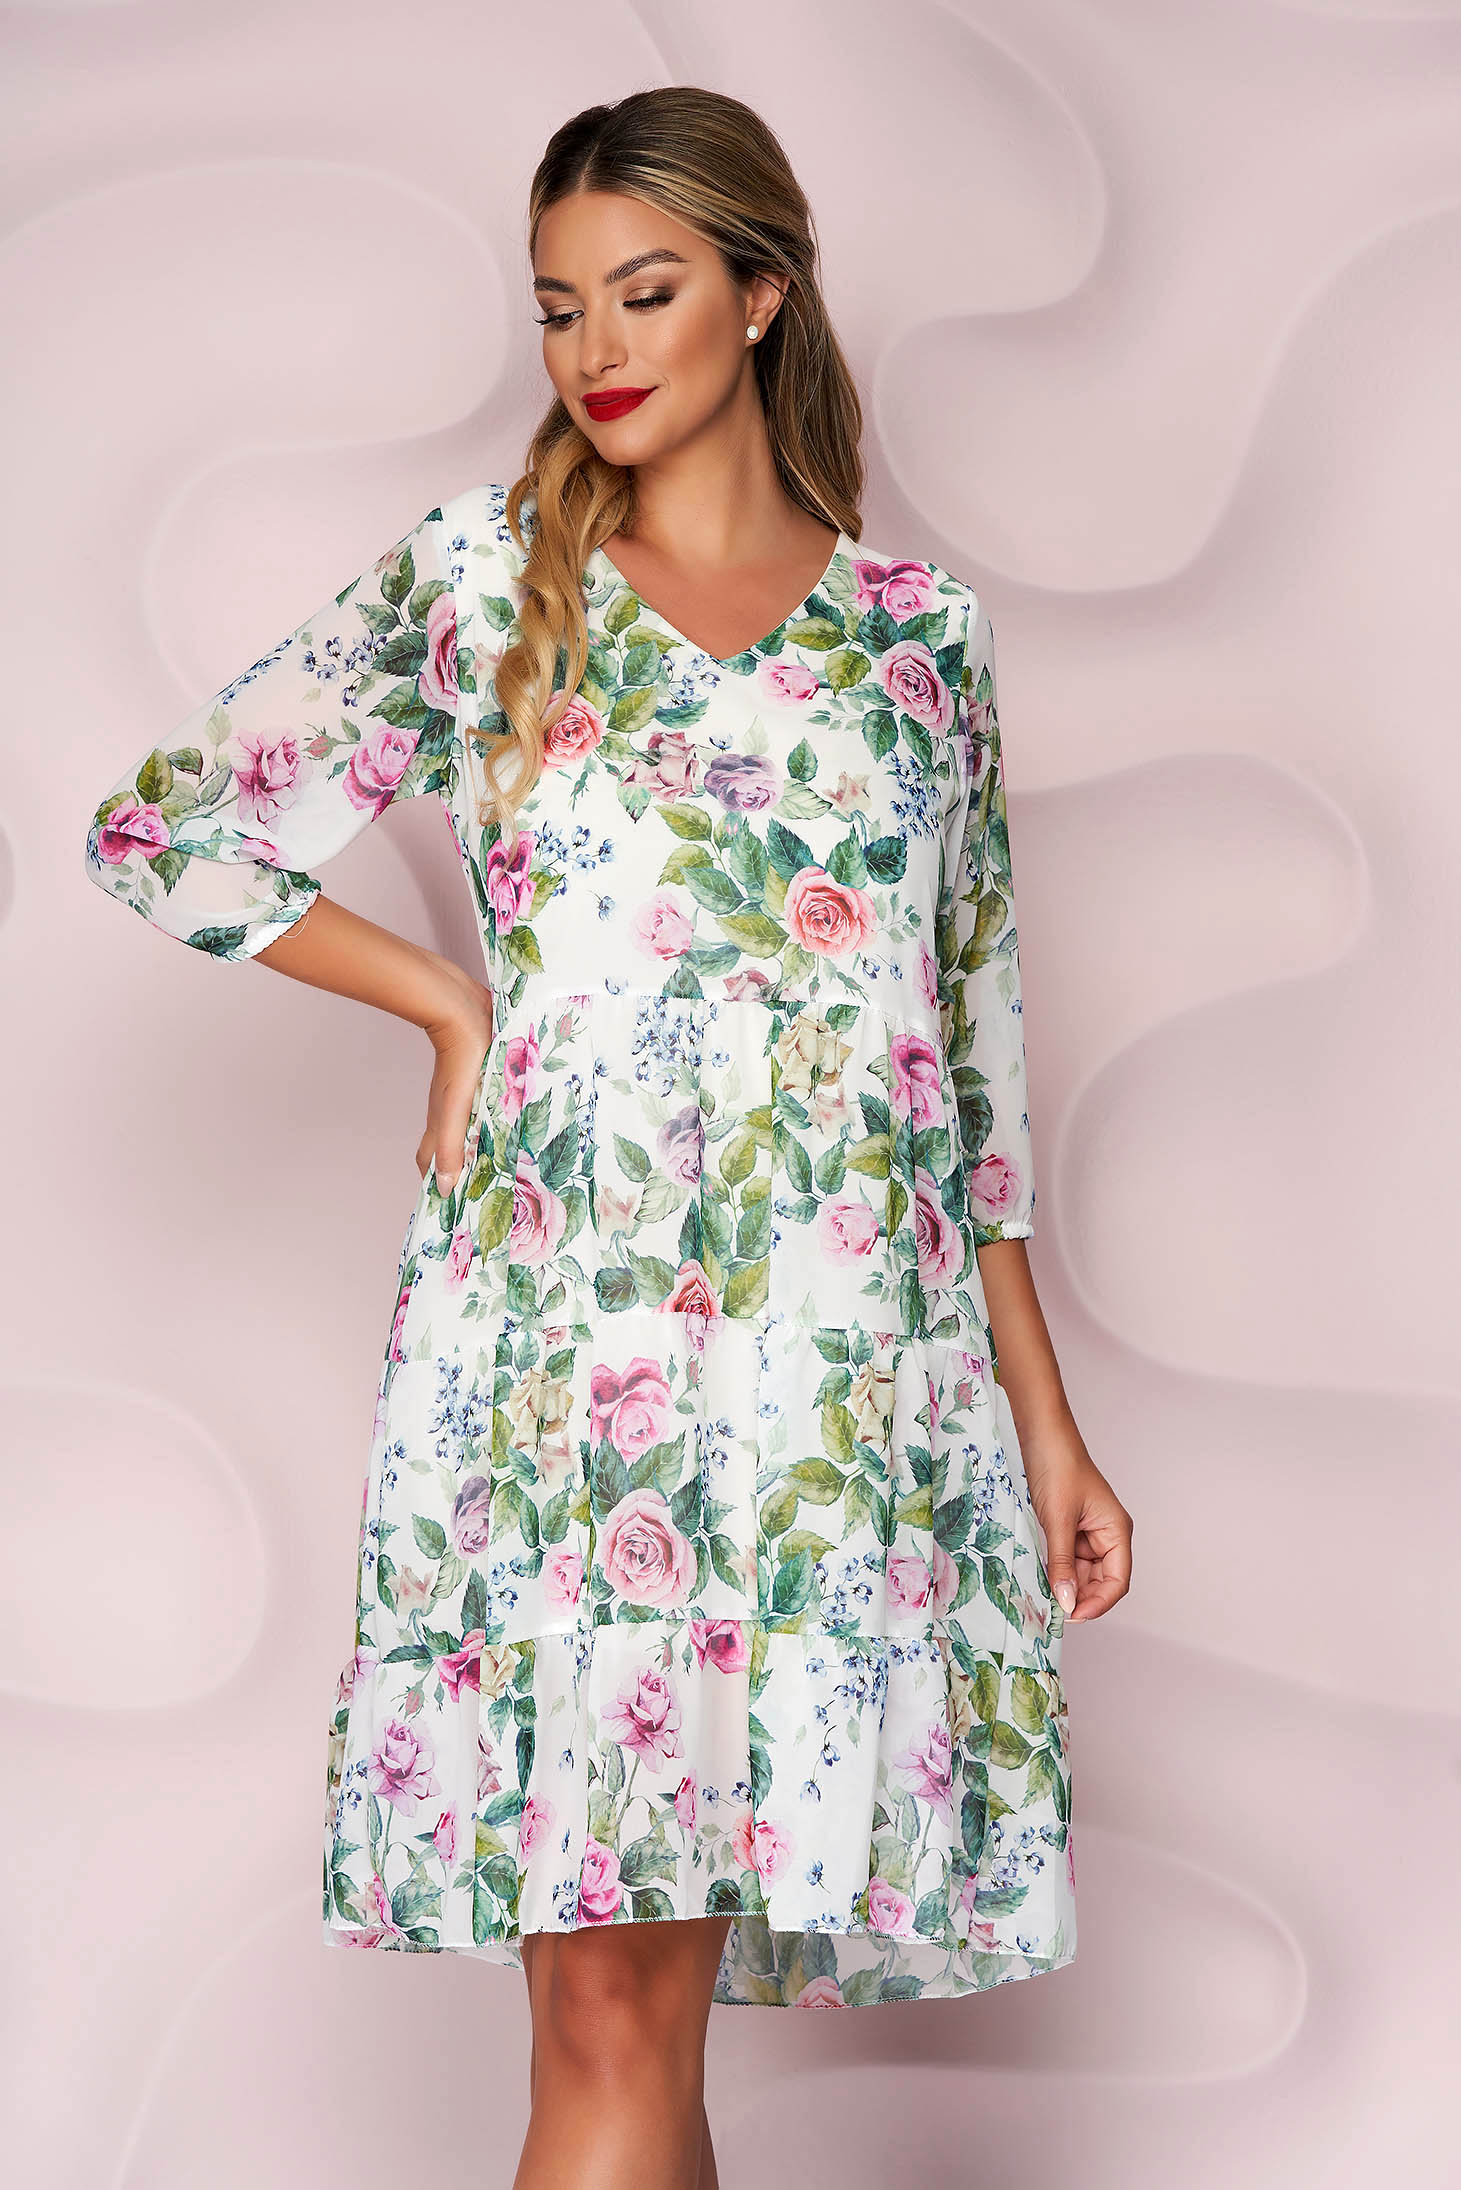 From veil fabric loose fit with ruffle details with 3/4 sleeves dress